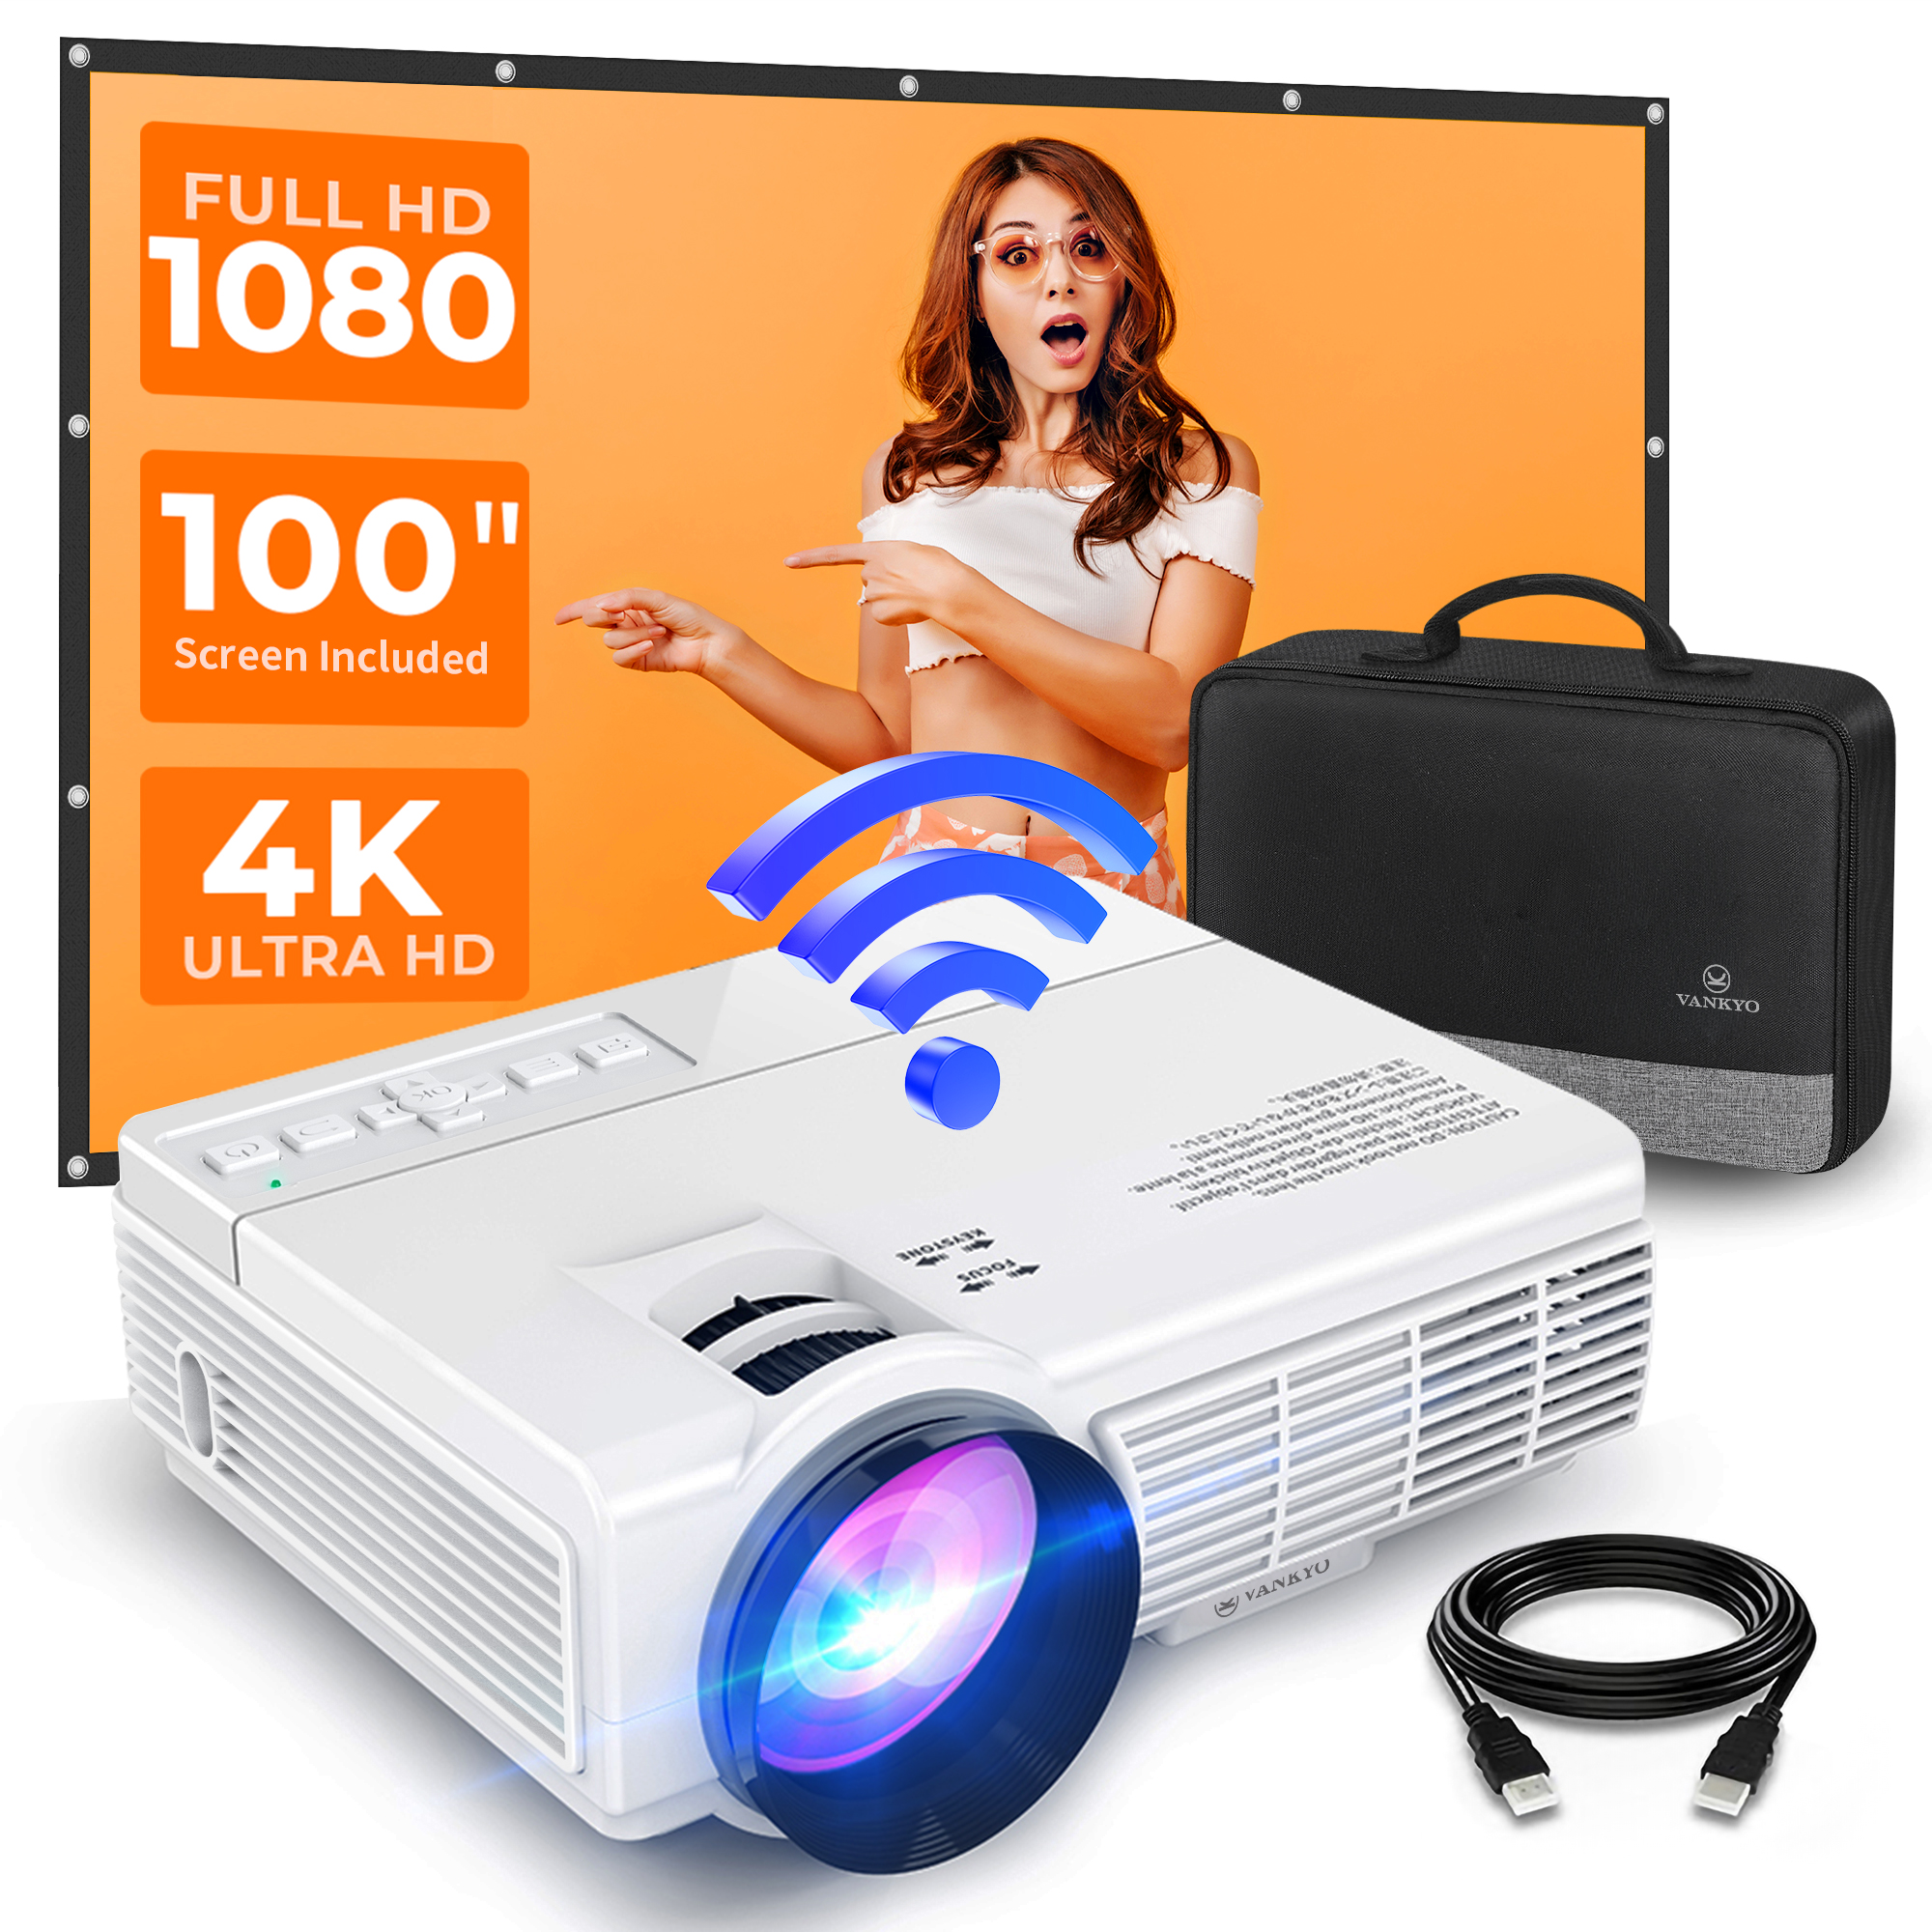 WiFi Mini Projector, VANKYO Leisure 1 Pro Portable Video Projector, 1080P Supported 230" Projection Size Home Theater Projector for iOS/Android Devices, Compatible with TV Stick, HDMI, VGA and USB - image 1 of 8